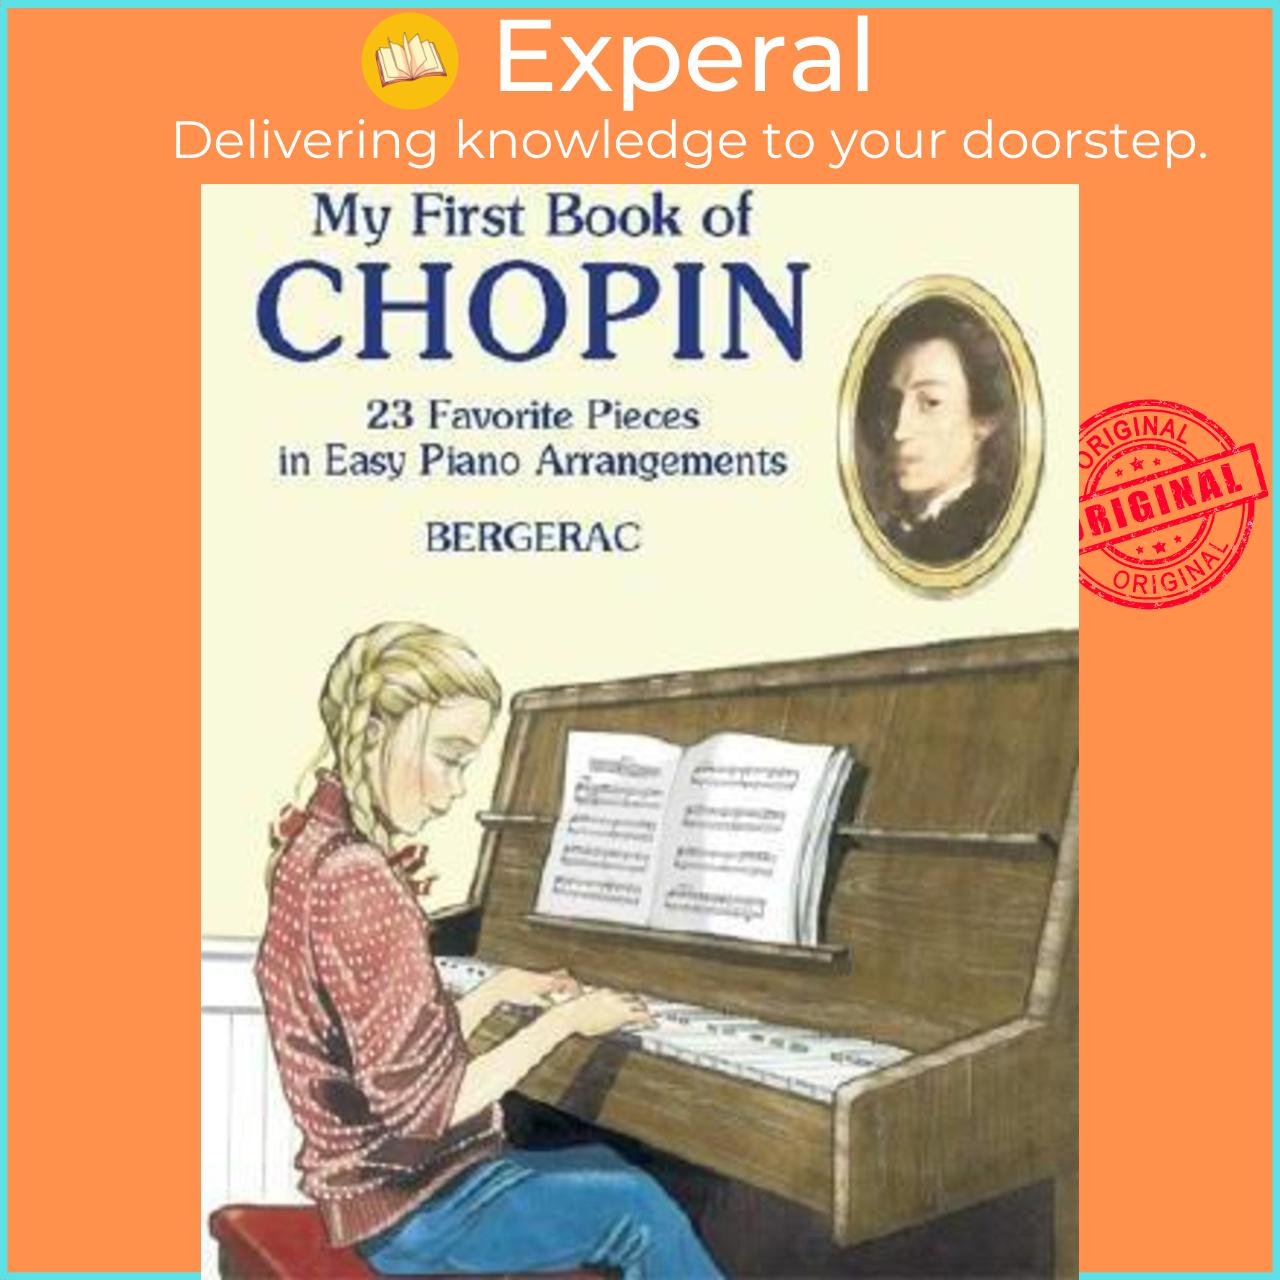 Sách - My First Book of Chopin by Bergerac (US edition, paperback)